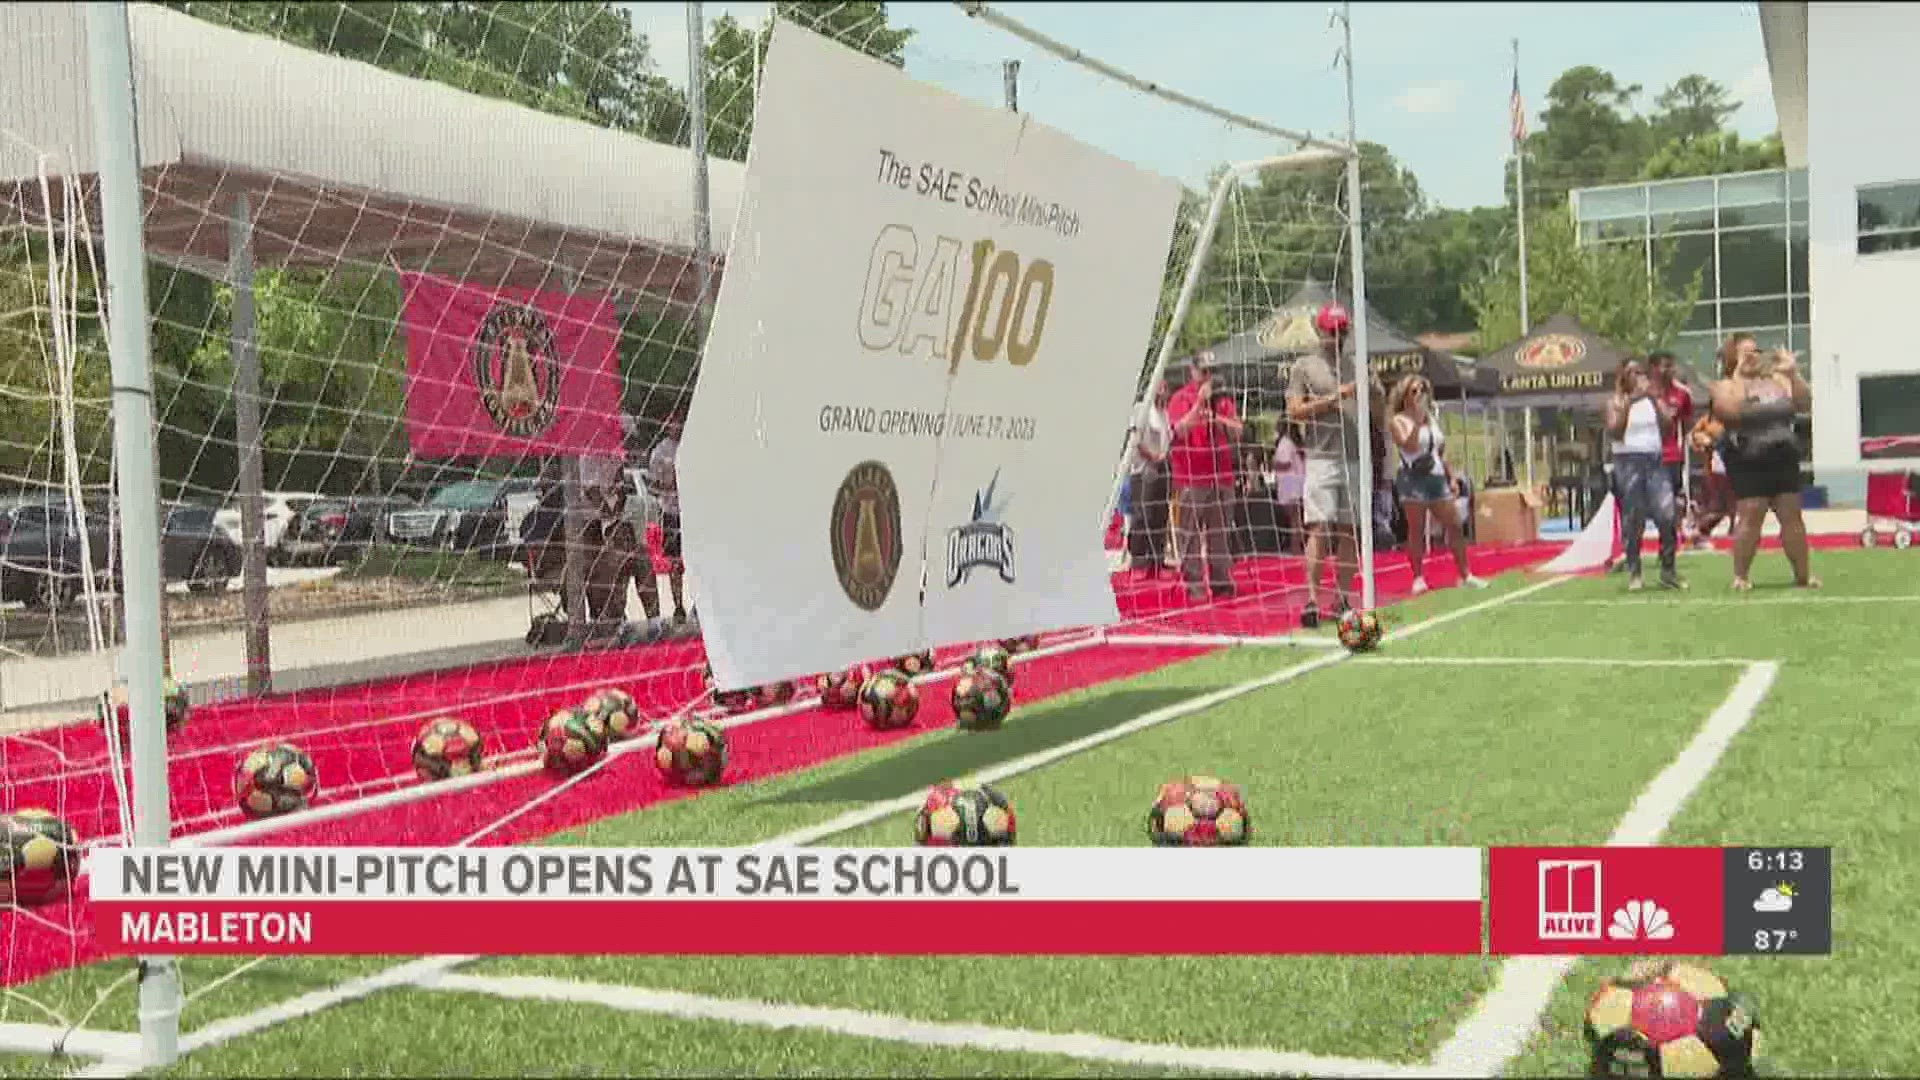 It's an initiative to bring soccer to underserved areas of metro Atlanta.